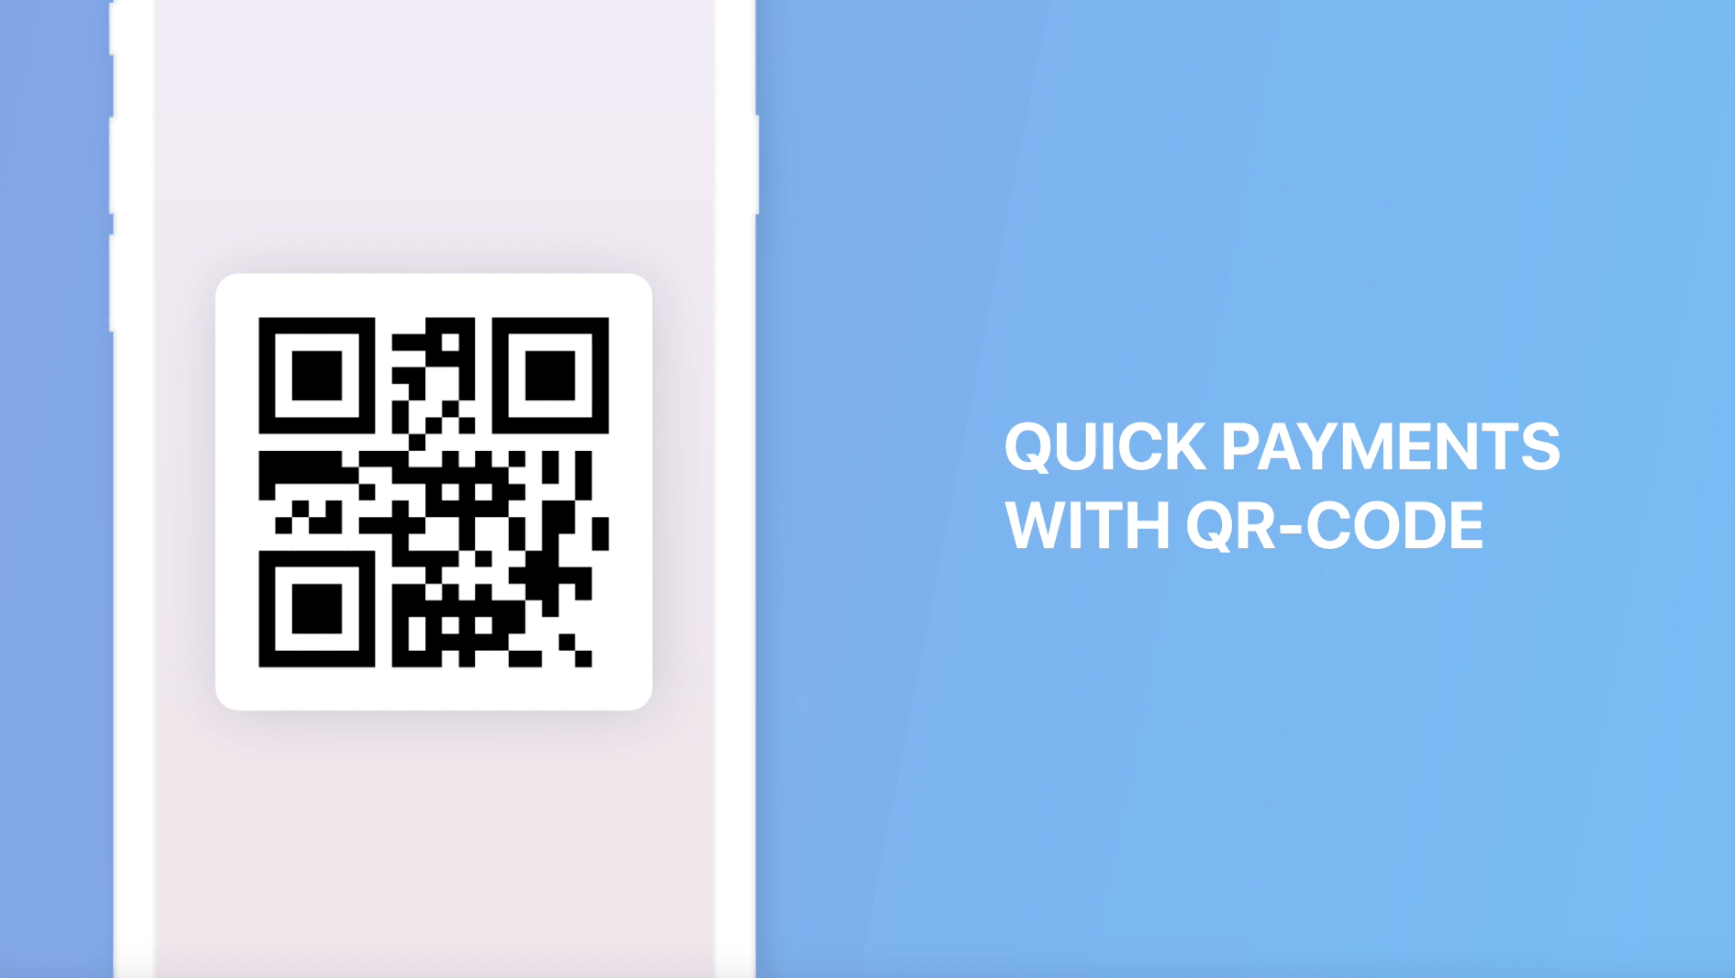 quick payments with QR code Enterprise Messaging for Digital Wallets